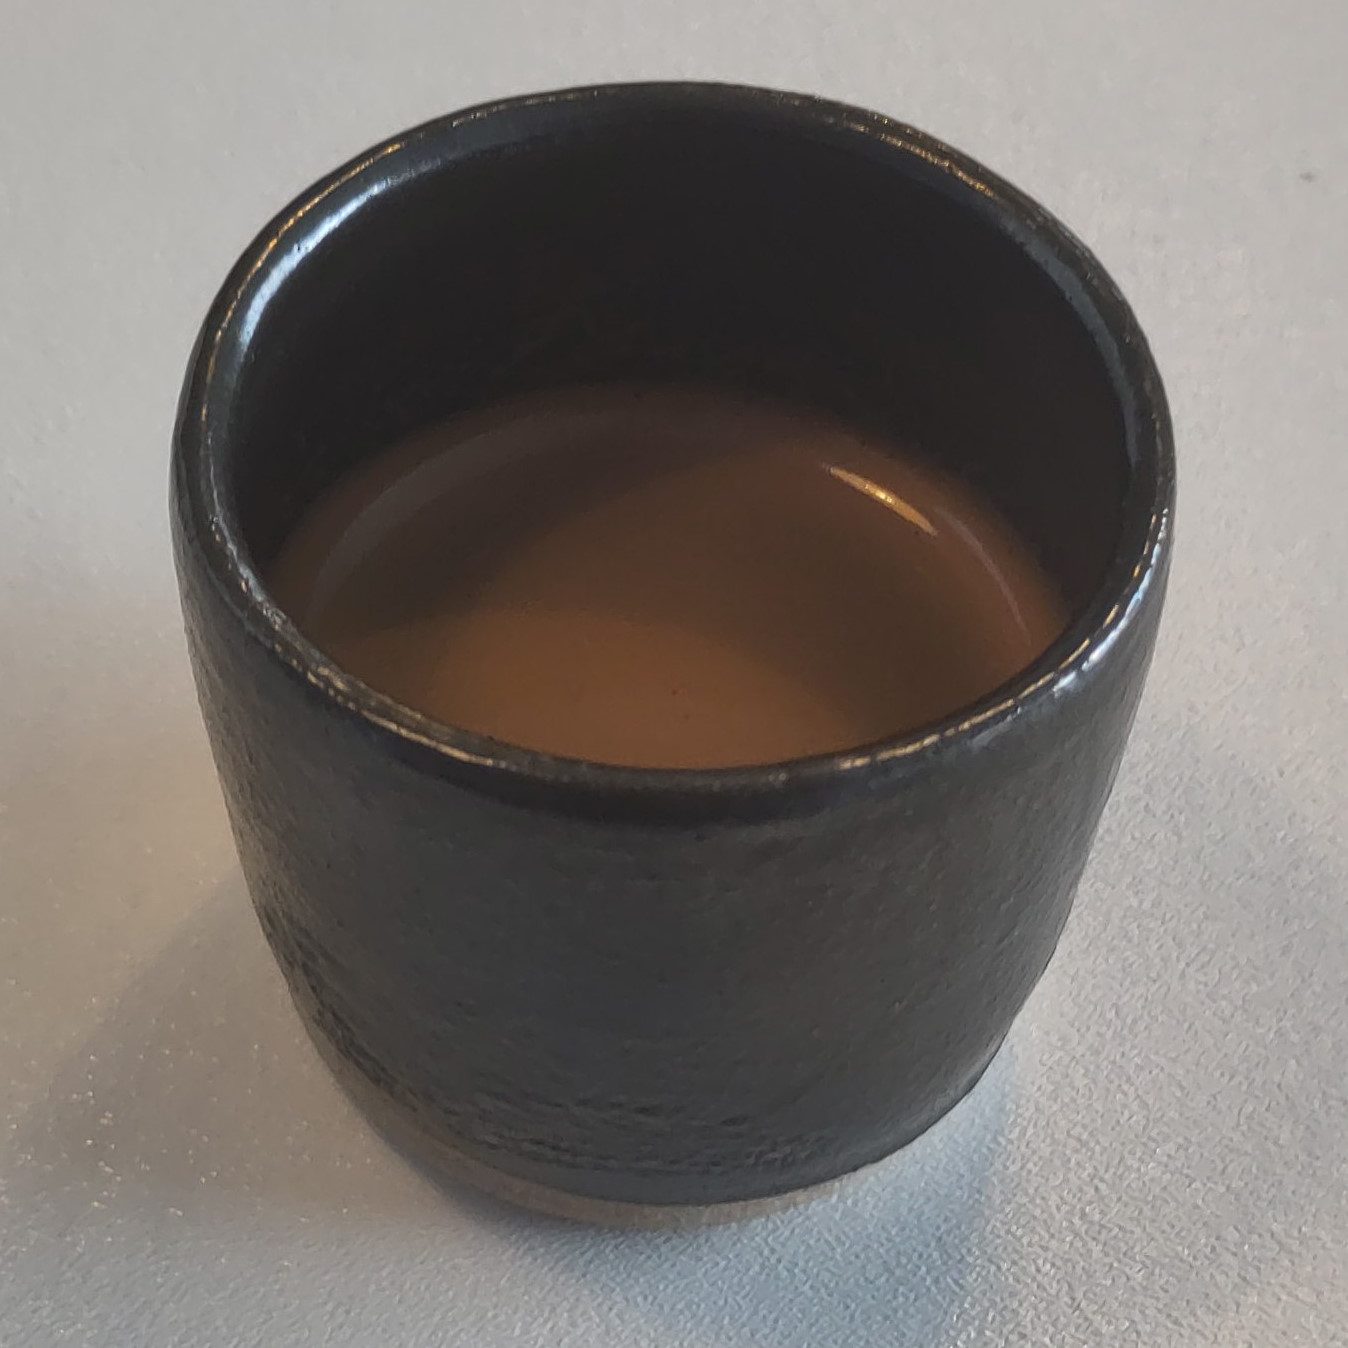 A lovely espresso in a dark, handleless ceramic cup